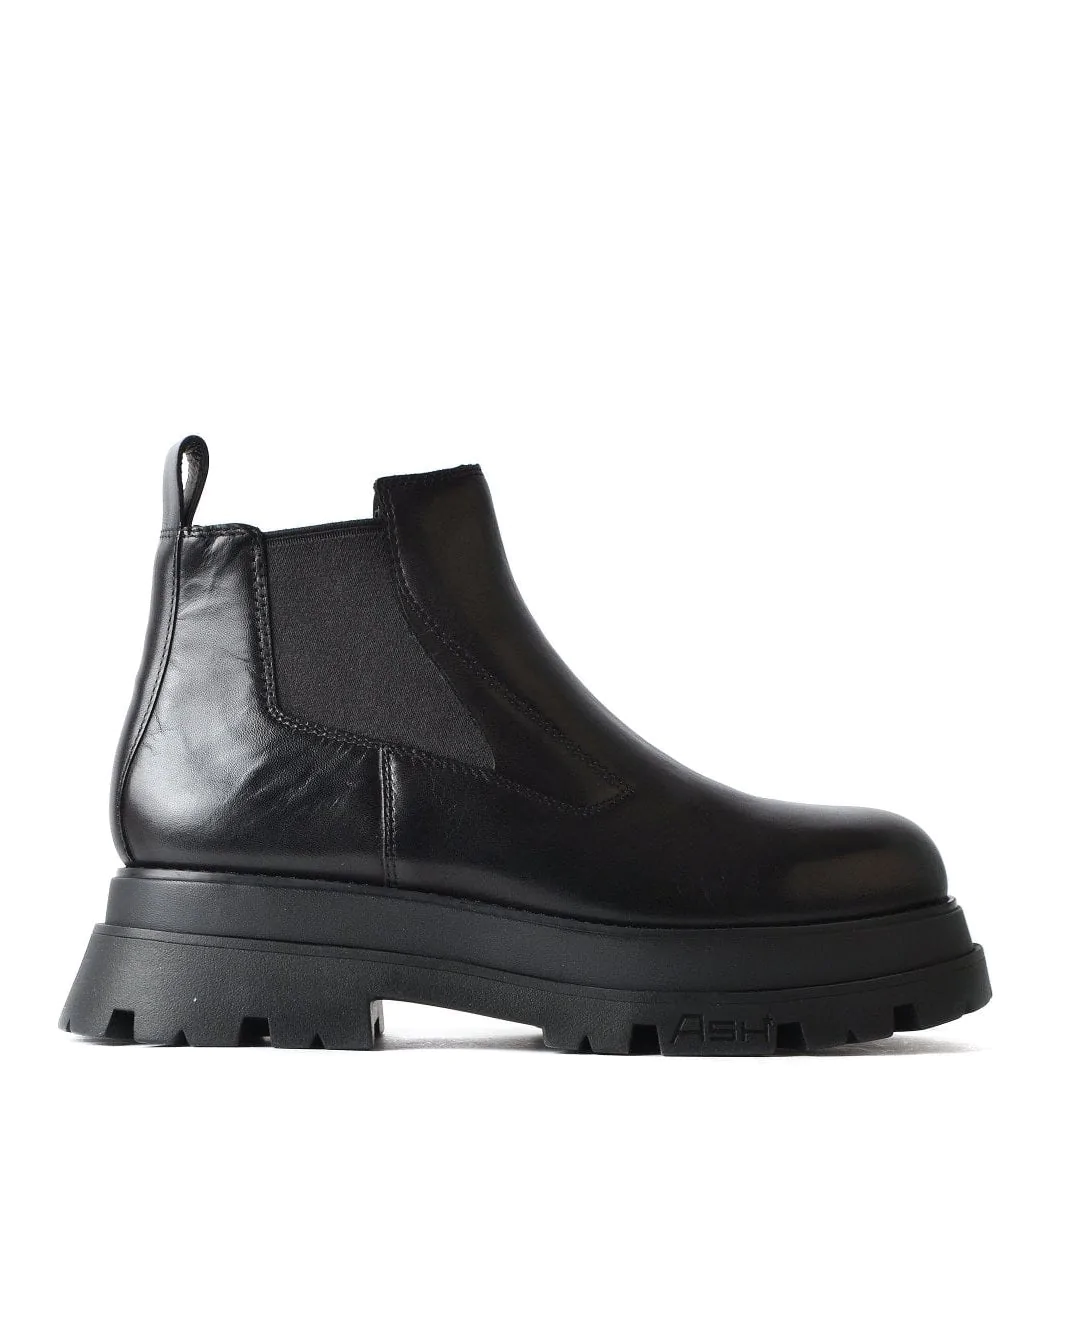 Ash Edition Black Leather Ankle Boots